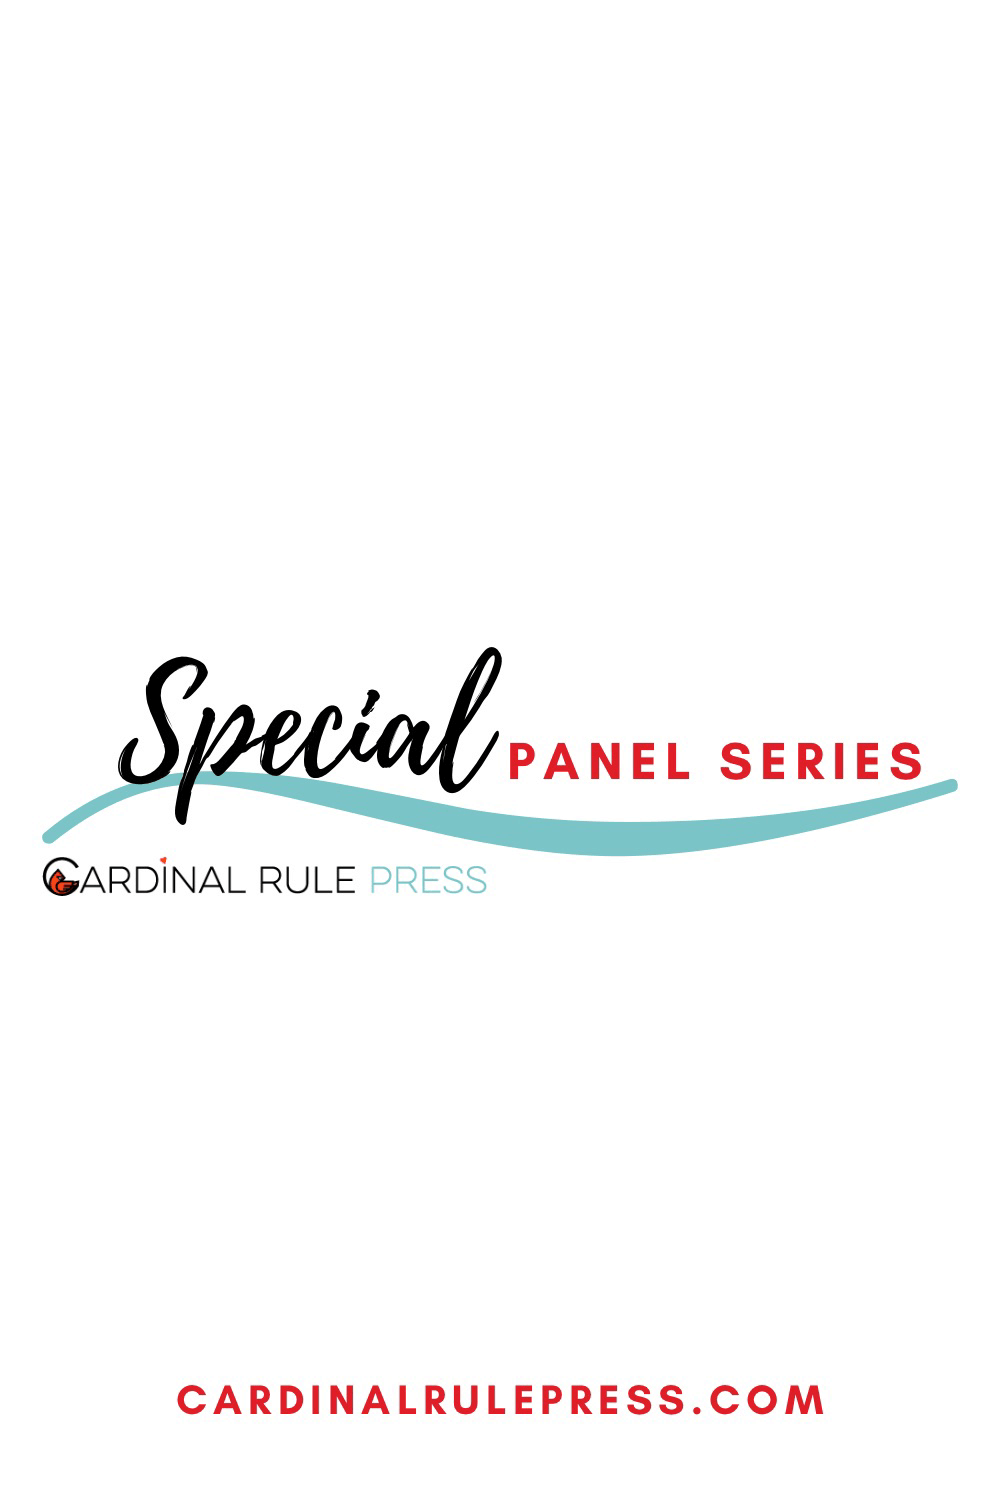 Podcast: Special Panel Series. We interview auth#SpecialPAnel #Authors #Podcast  #AlltheWRITEMarketing